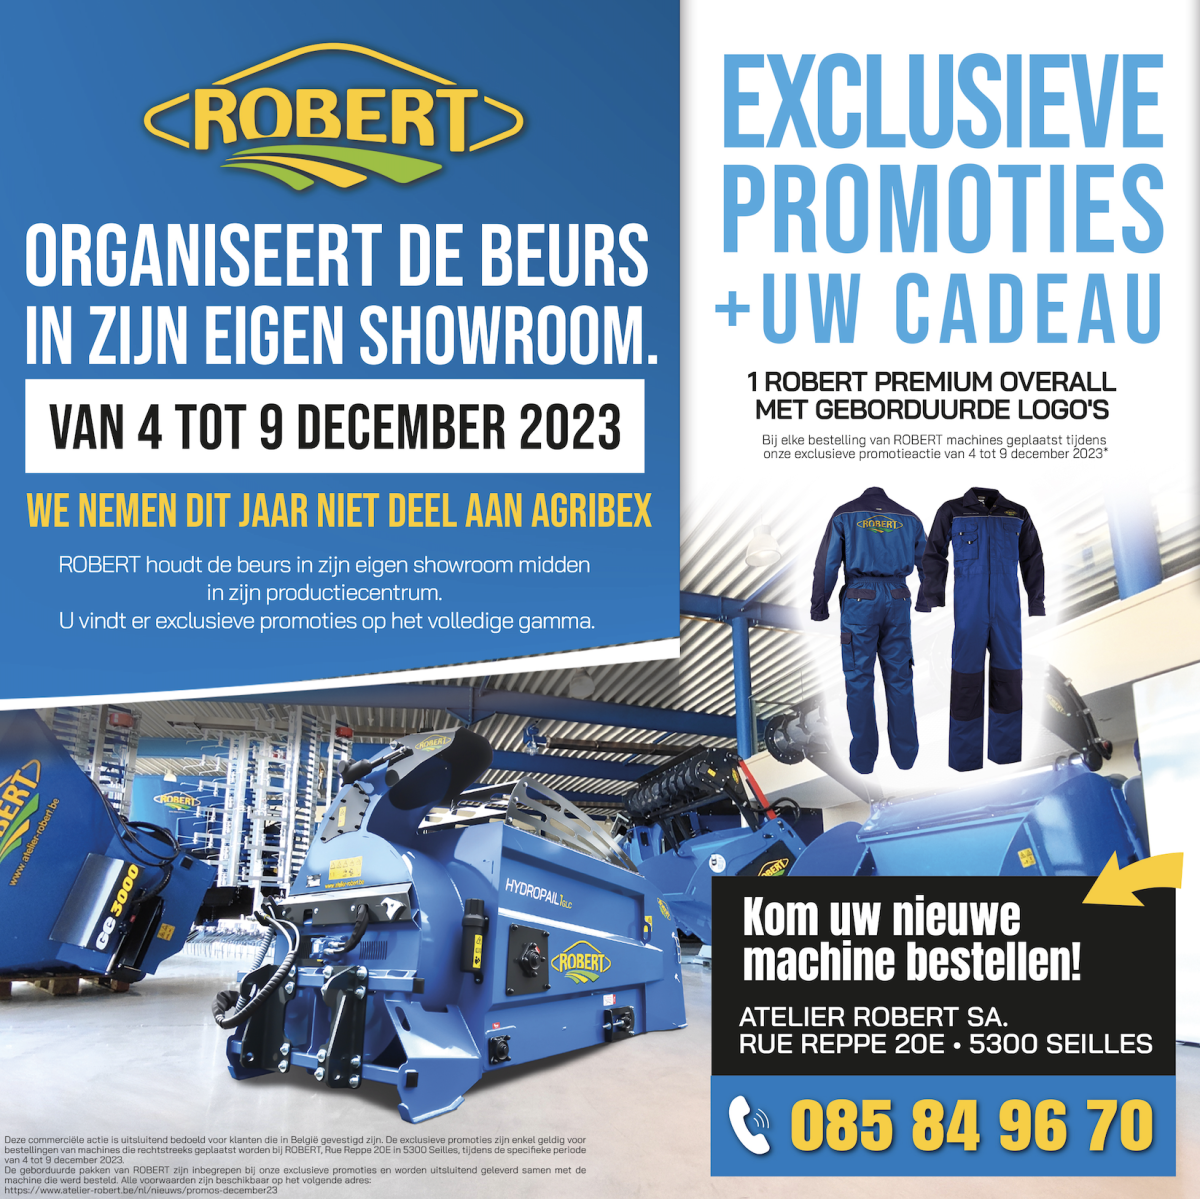 PROMOTIONS AGRIBEX